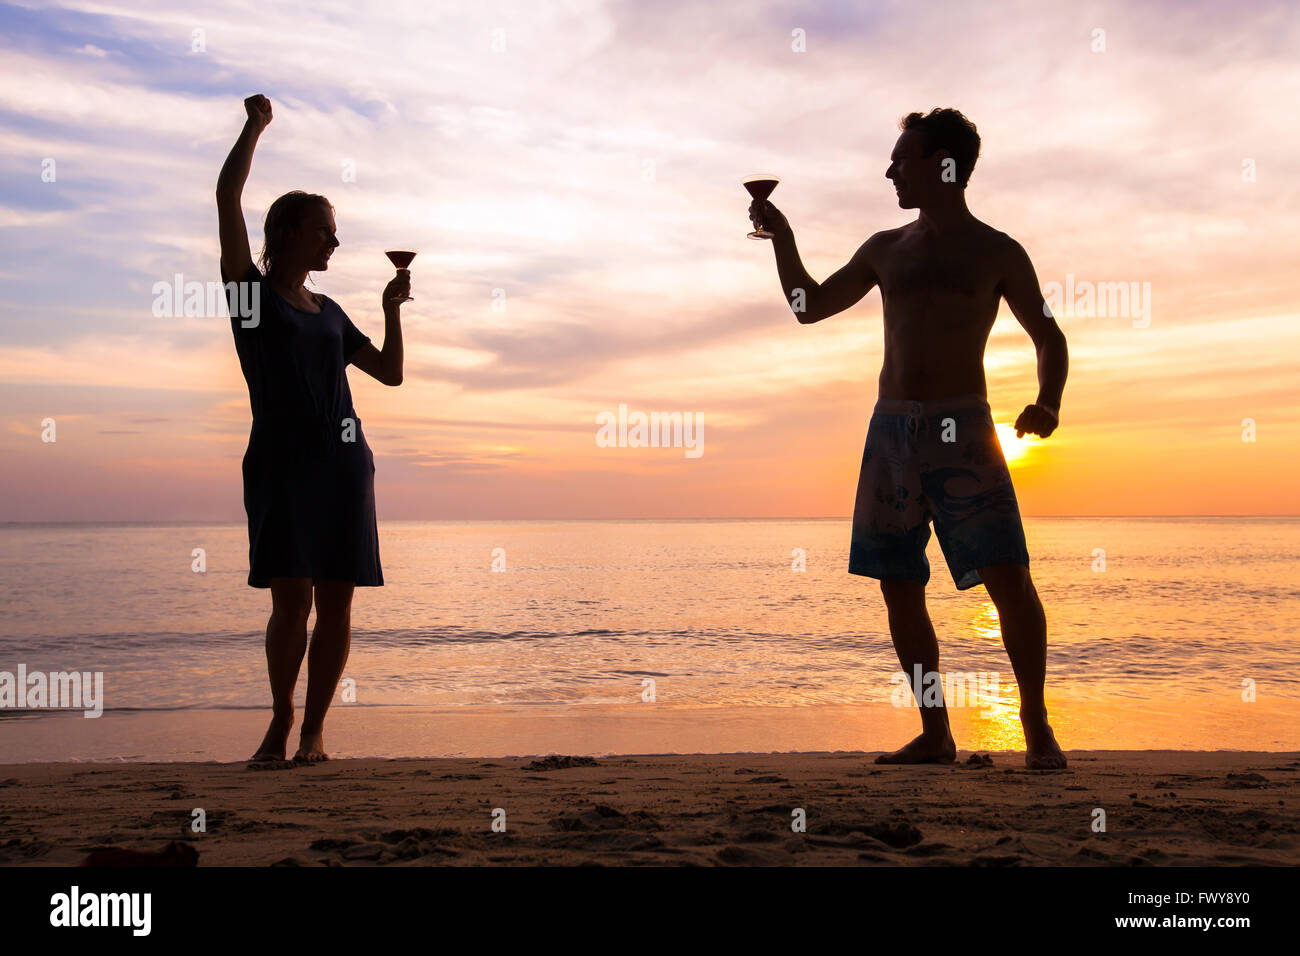 beach festival or party with friends, joyful happy people celebrating life, couple dancing with cocktails Stock Photo